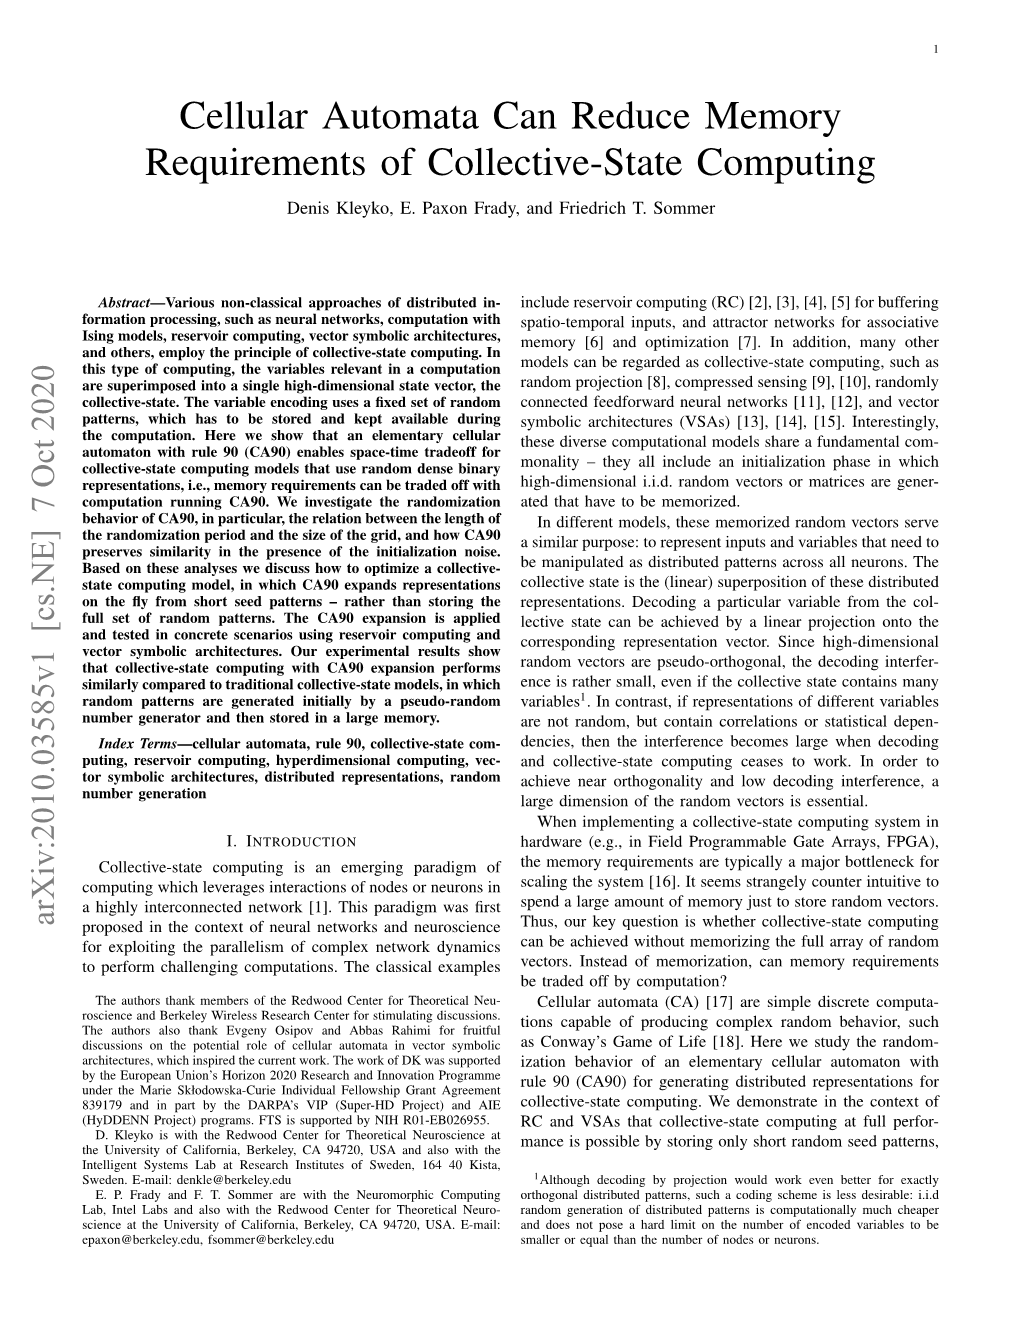 Cellular Automata Can Reduce Memory Requirements of Collective-State Computing Denis Kleyko, E